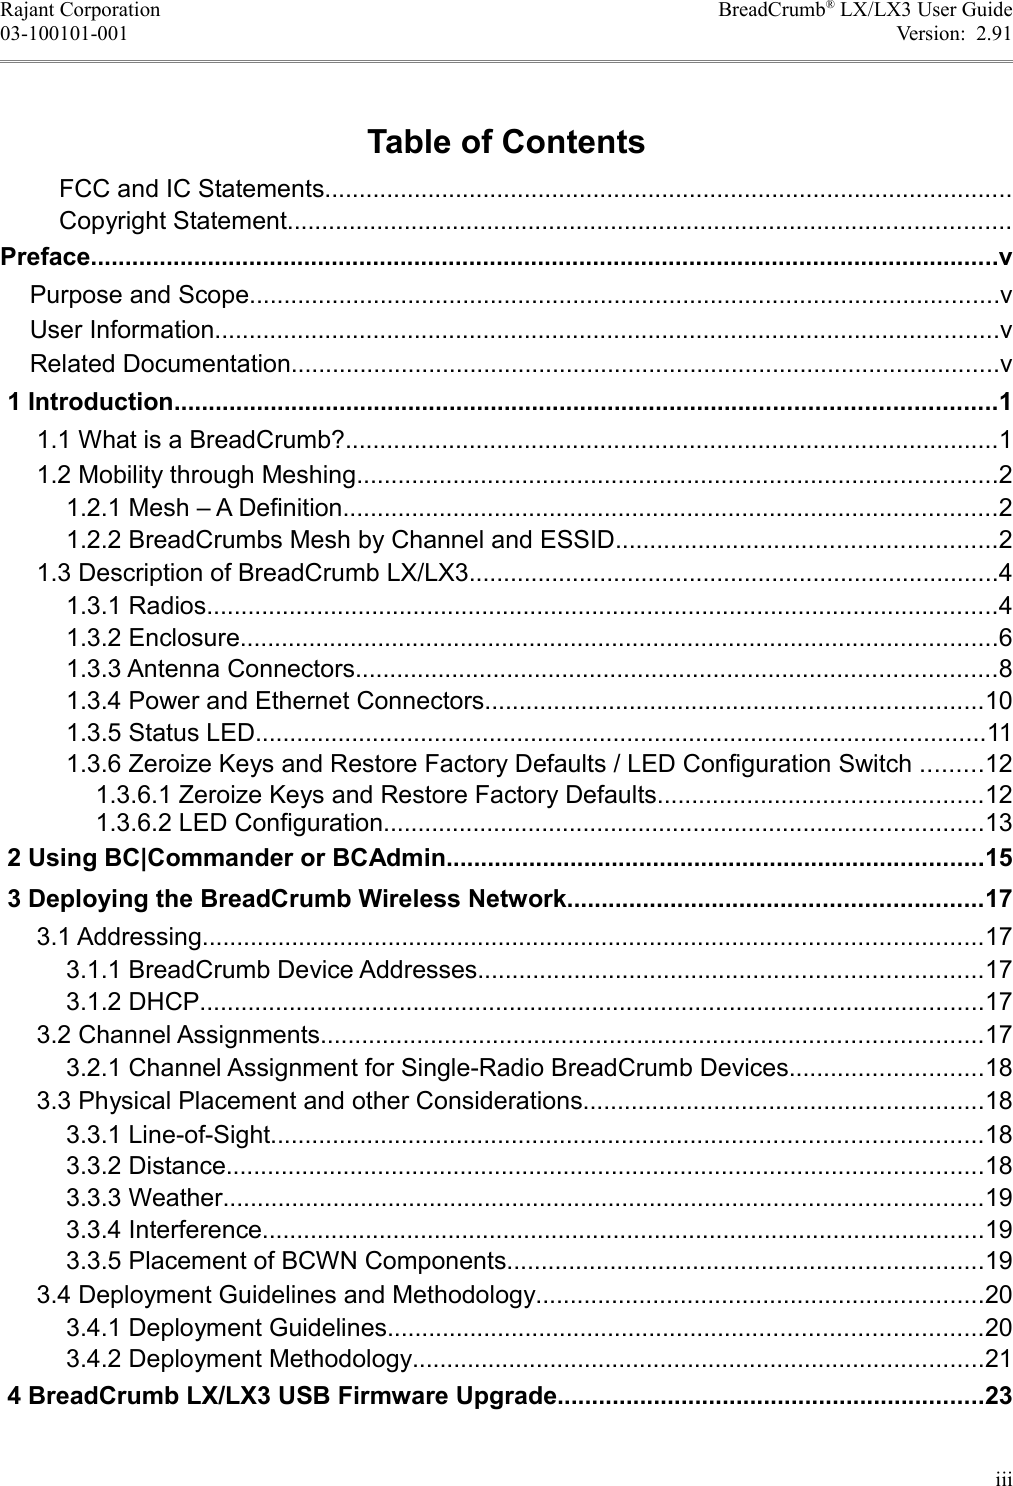 Rajant Corporation BreadCrumb® LX/LX3 User Guide03-100101-001 Version:  2.91Table of ContentsFCC and IC Statements....................................................................................................Copyright Statement.........................................................................................................Preface....................................................................................................................................vPurpose and Scope.............................................................................................................vUser Information..................................................................................................................vRelated Documentation.......................................................................................................v 1 Introduction.......................................................................................................................1 1.1 What is a BreadCrumb?...............................................................................................1 1.2 Mobility through Meshing.............................................................................................2 1.2.1 Mesh – A Definition...............................................................................................2 1.2.2 BreadCrumbs Mesh by Channel and ESSID.......................................................2 1.3 Description of BreadCrumb LX/LX3.............................................................................4 1.3.1 Radios...................................................................................................................4 1.3.2 Enclosure..............................................................................................................6 1.3.3 Antenna Connectors.............................................................................................8 1.3.4 Power and Ethernet Connectors........................................................................10 1.3.5 Status LED..........................................................................................................11 1.3.6 Zeroize Keys and Restore Factory Defaults / LED Configuration Switch .........12 1.3.6.1 Zeroize Keys and Restore Factory Defaults...............................................12 1.3.6.2 LED Configuration.......................................................................................13 2 Using BC|Commander or BCAdmin..............................................................................15 3 Deploying the BreadCrumb Wireless Network............................................................17 3.1 Addressing.................................................................................................................17 3.1.1 BreadCrumb Device Addresses.........................................................................17 3.1.2 DHCP..................................................................................................................17 3.2 Channel Assignments................................................................................................17 3.2.1 Channel Assignment for Single-Radio BreadCrumb Devices............................18 3.3 Physical Placement and other Considerations..........................................................18 3.3.1 Line-of-Sight.......................................................................................................18 3.3.2 Distance..............................................................................................................18 3.3.3 Weather..............................................................................................................19 3.3.4 Interference.........................................................................................................19 3.3.5 Placement of BCWN Components.....................................................................19 3.4 Deployment Guidelines and Methodology.................................................................20 3.4.1 Deployment Guidelines......................................................................................20 3.4.2 Deployment Methodology...................................................................................21 4 BreadCrumb LX/LX3 USB Firmware Upgrade..............................................................23iii